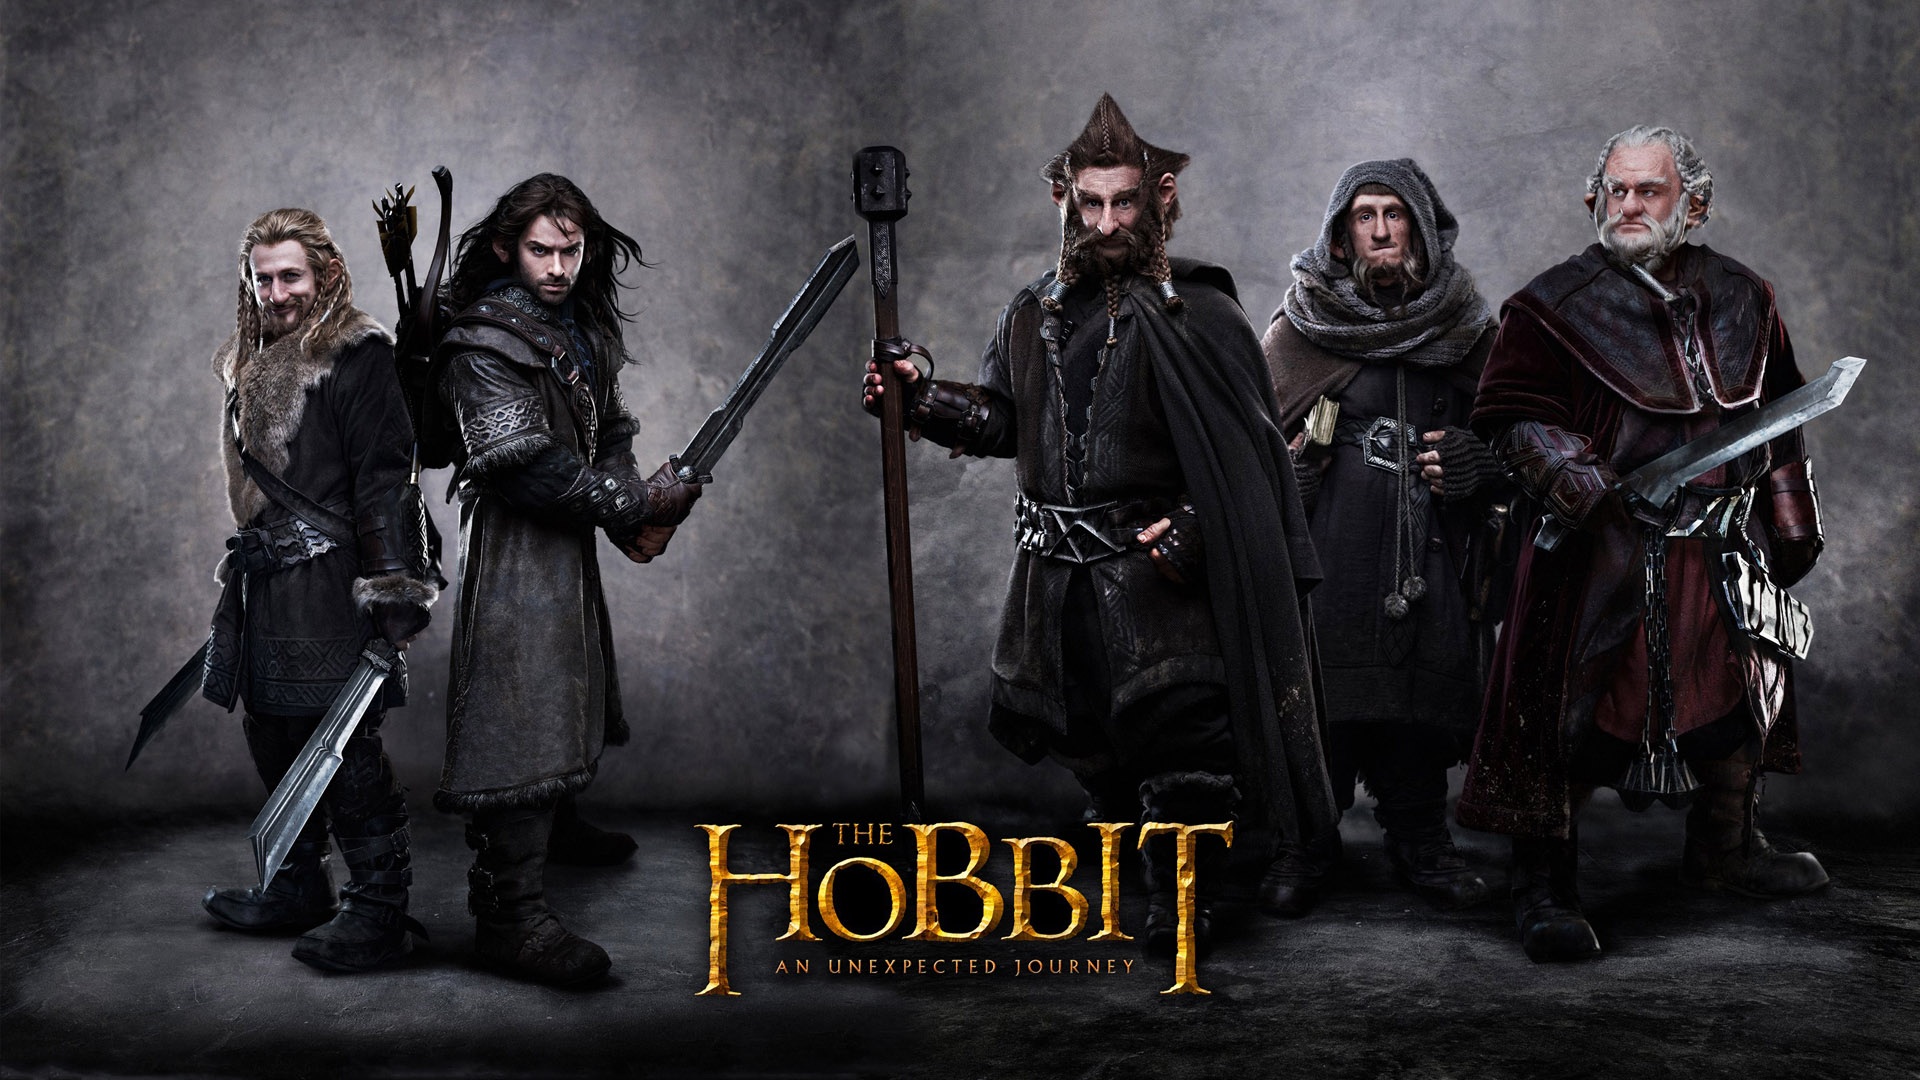 The Hobbit: An Unexpected Journey Blu-ray steelbook is coming to Slovakia